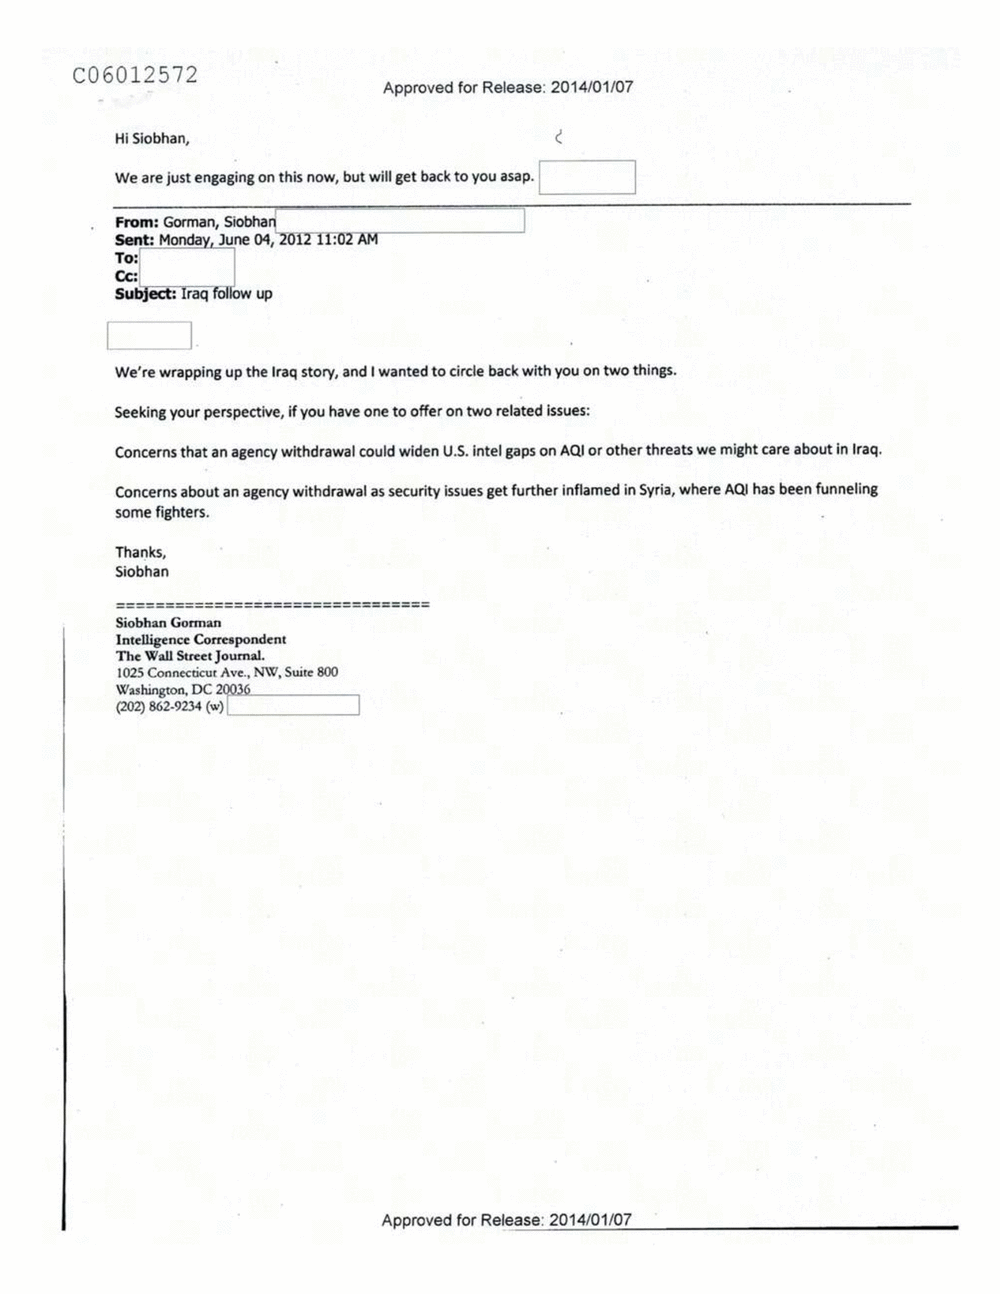 Page 107 from Email Correspondence Between Reporters and CIA Flacks